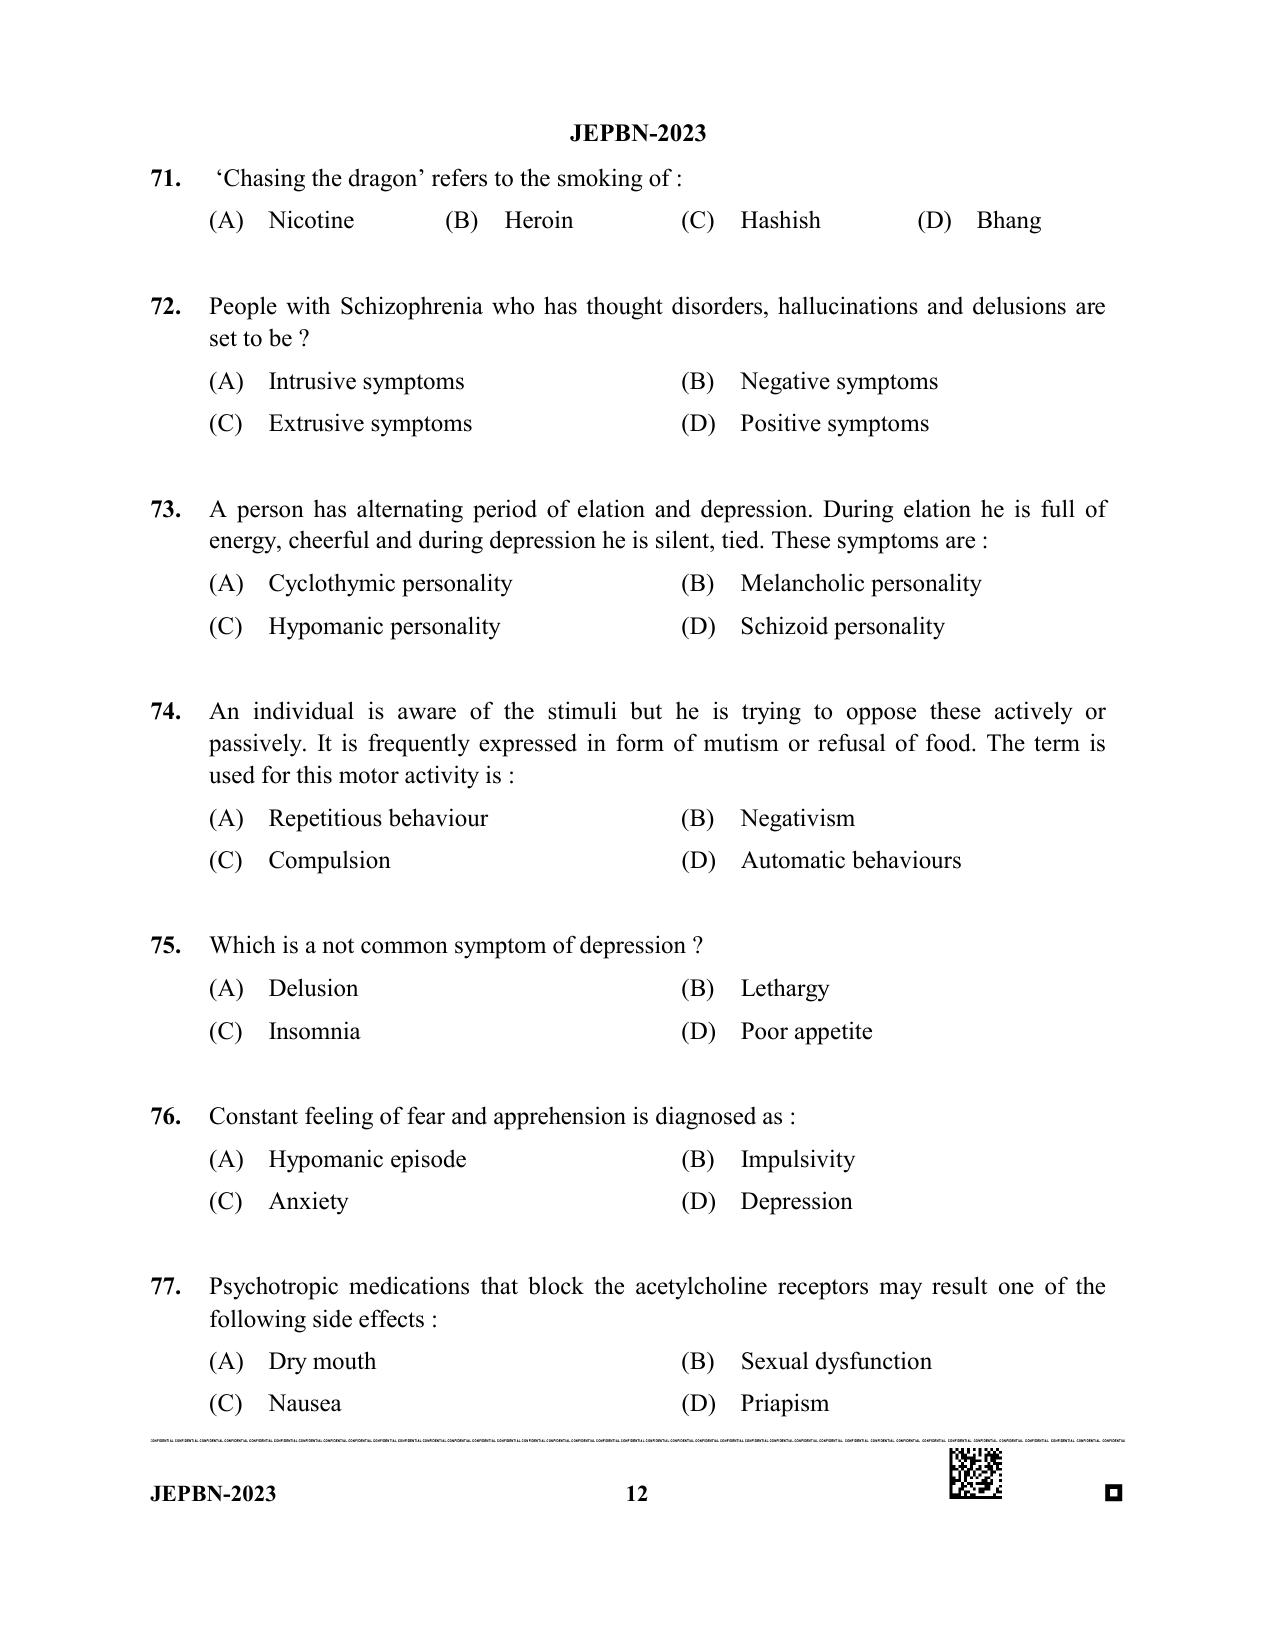 WBJEE JEPBN 2023 Question Paper - Page 12